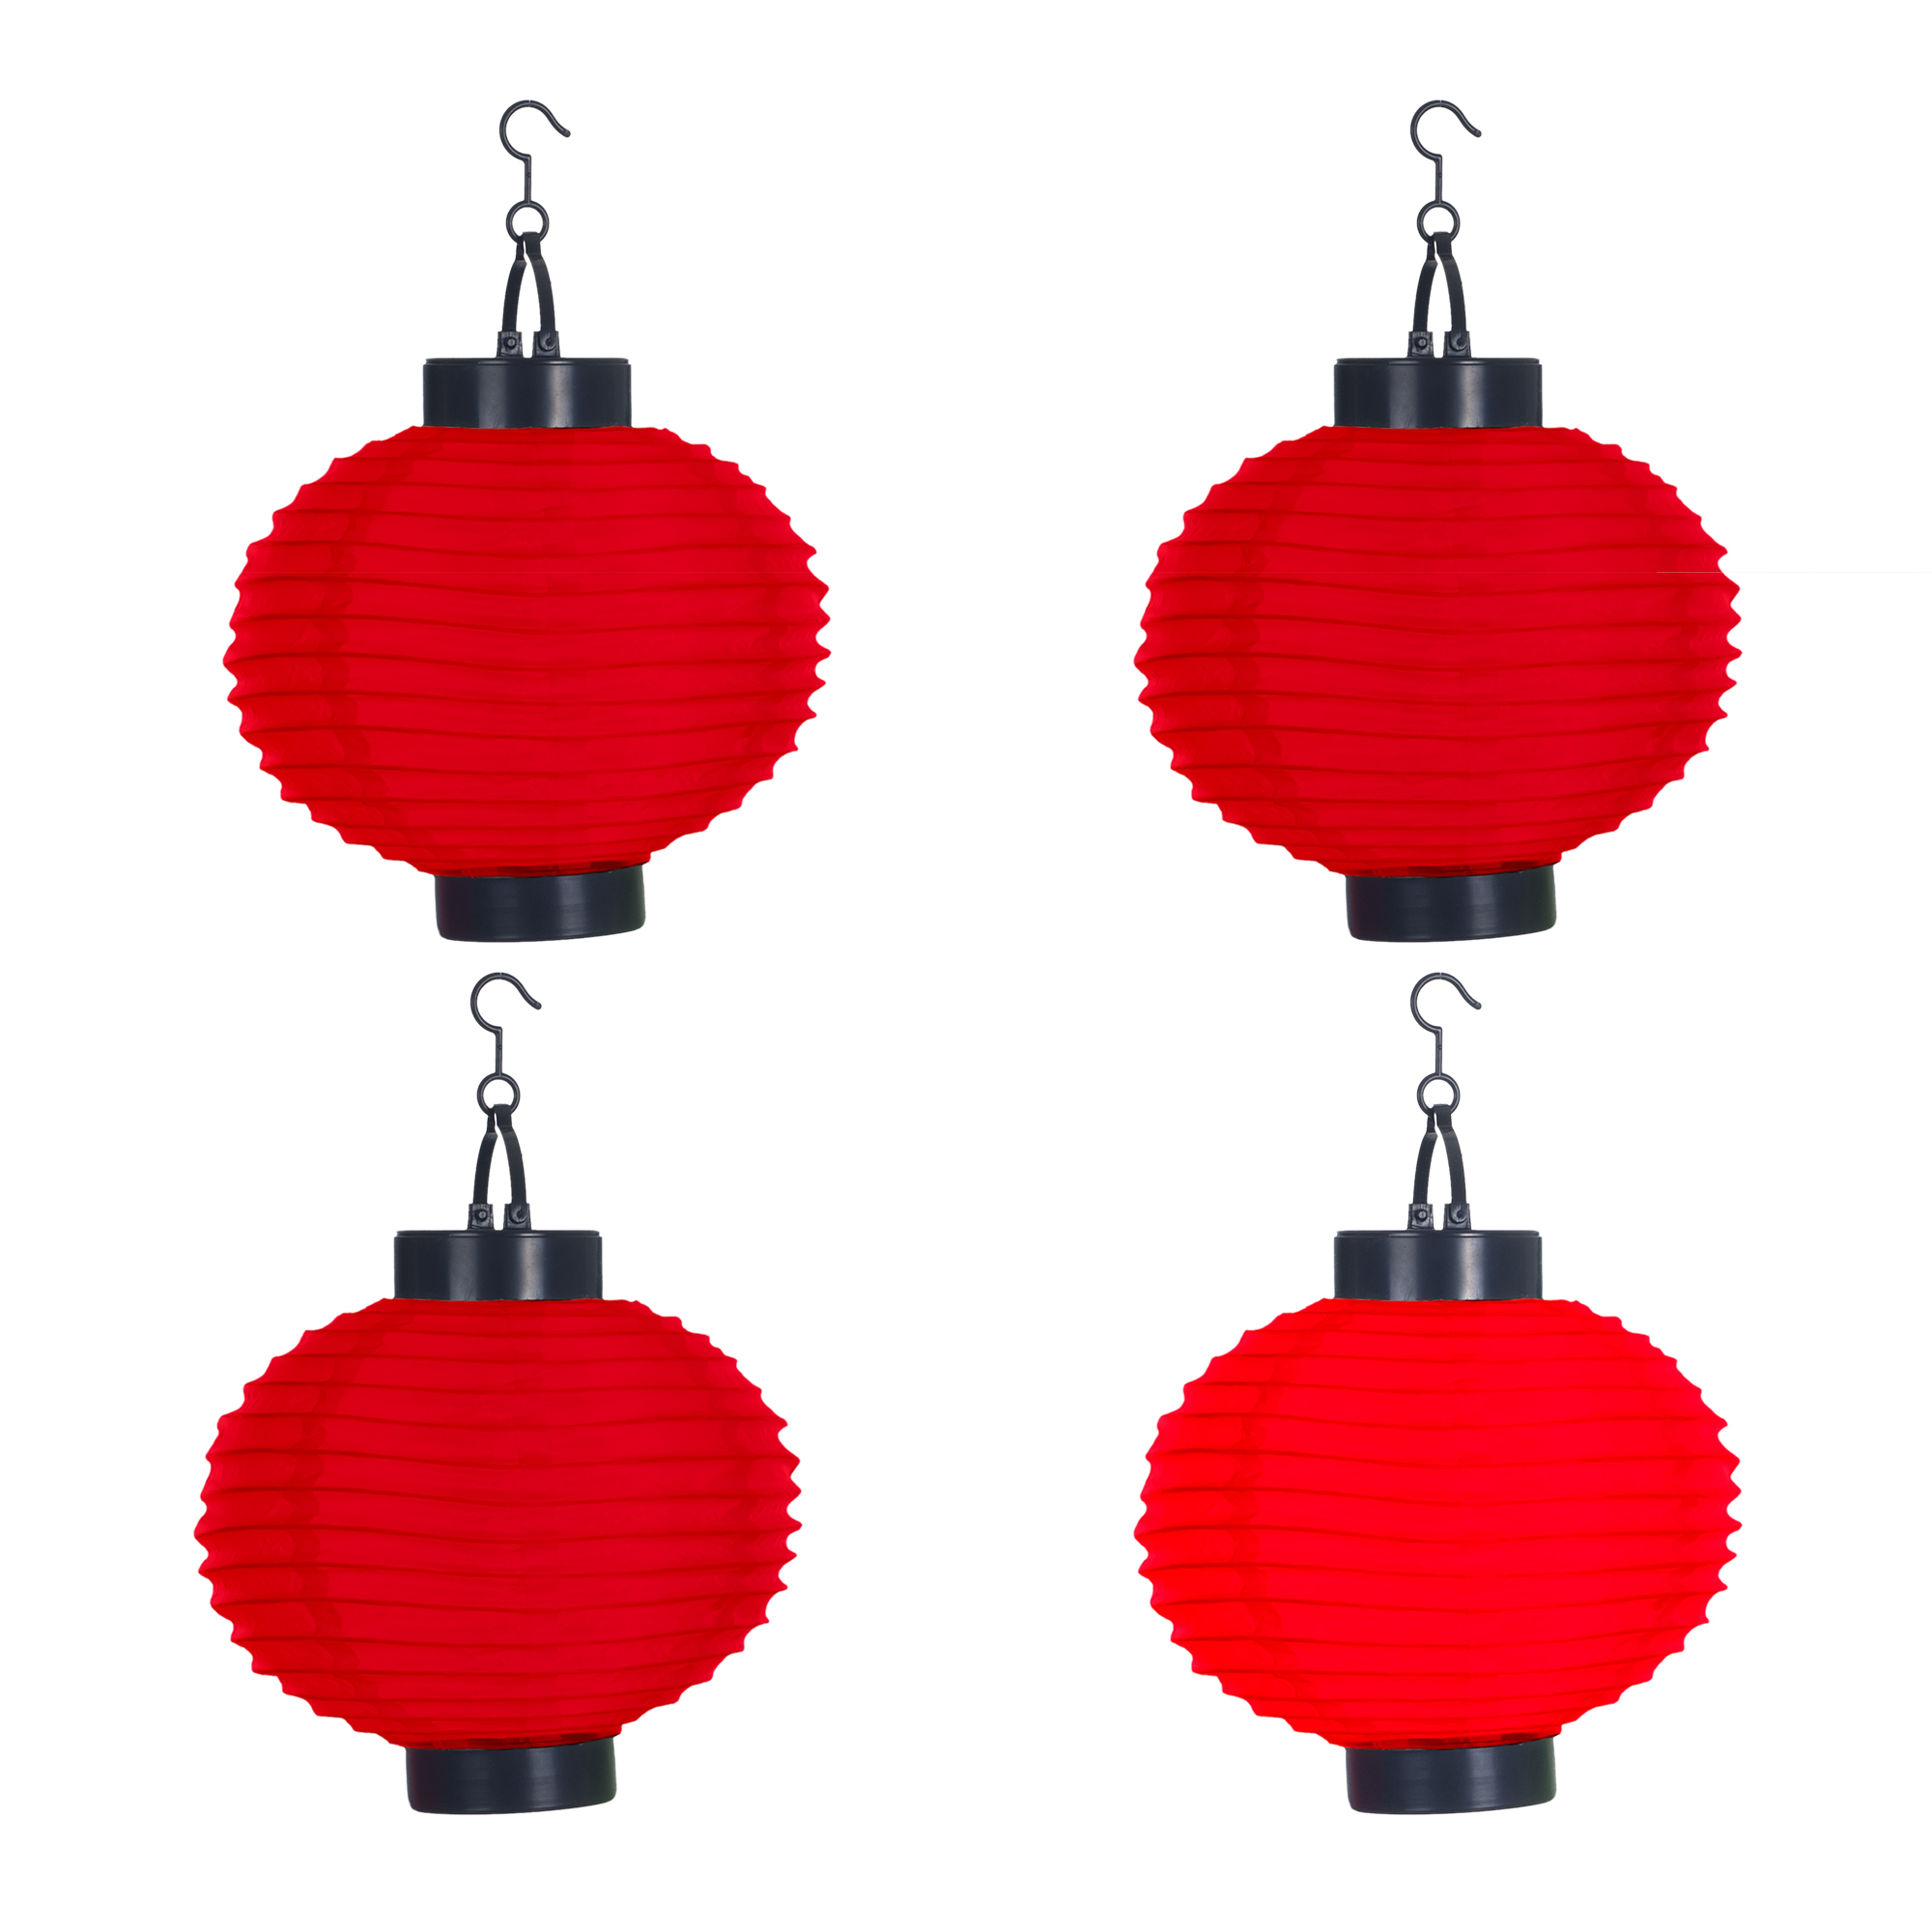 Solar Outdoor Lantern - Hanging Nylon Rechargeable LED Chinese Lighting for Garden, Patio, Gazebo, or Backyard by Pure Garden (Red, Set of 4) - image 5 of 7